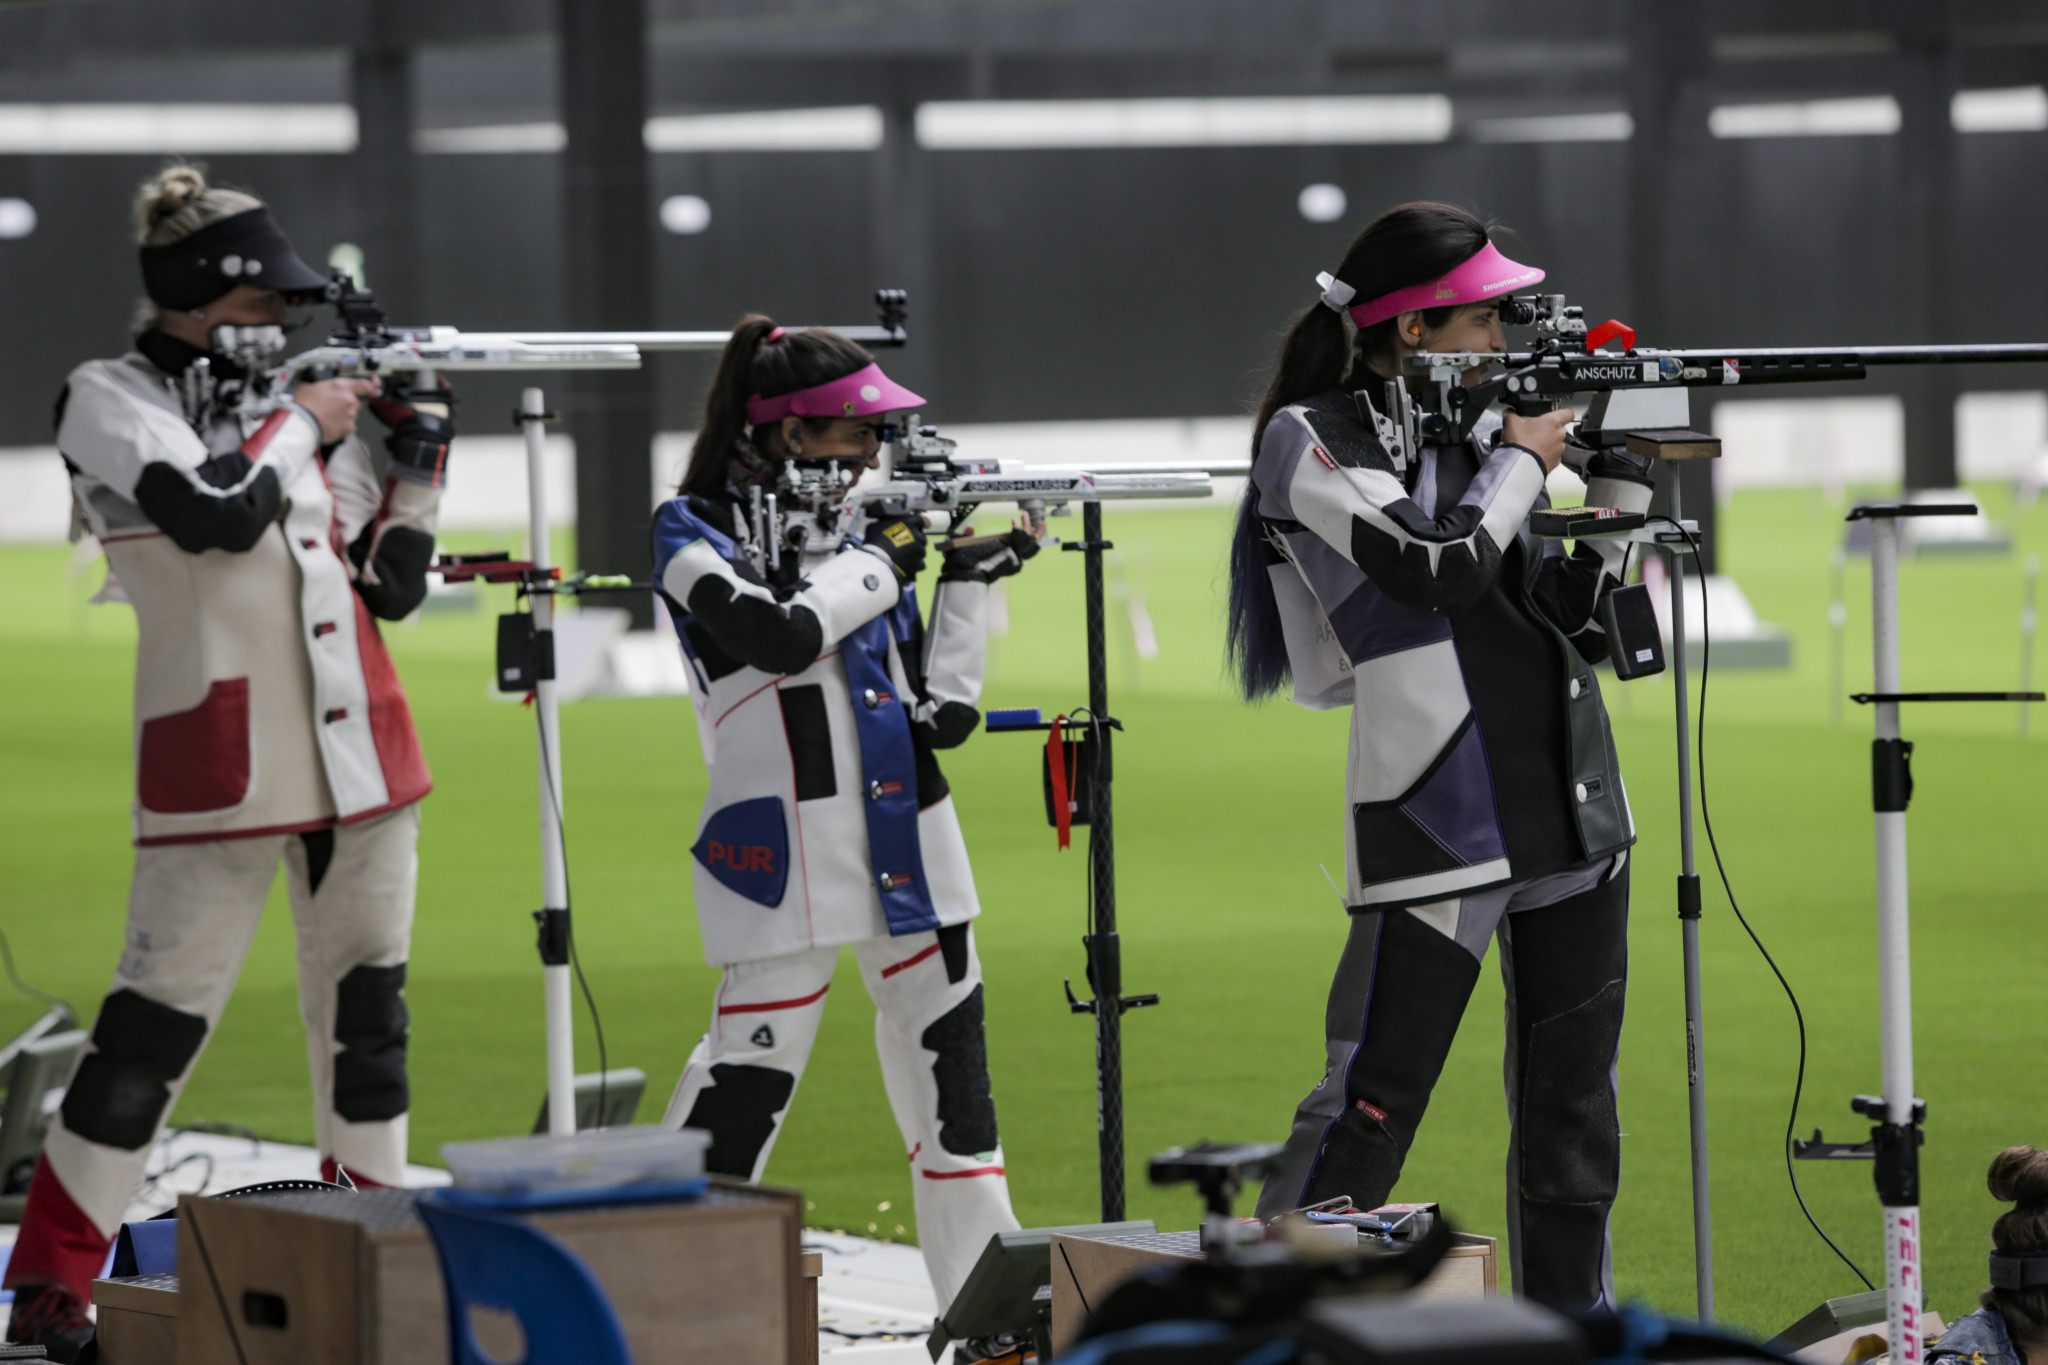 The final podium of the women's 50m rifle three positions was also decided ©Lima 2019